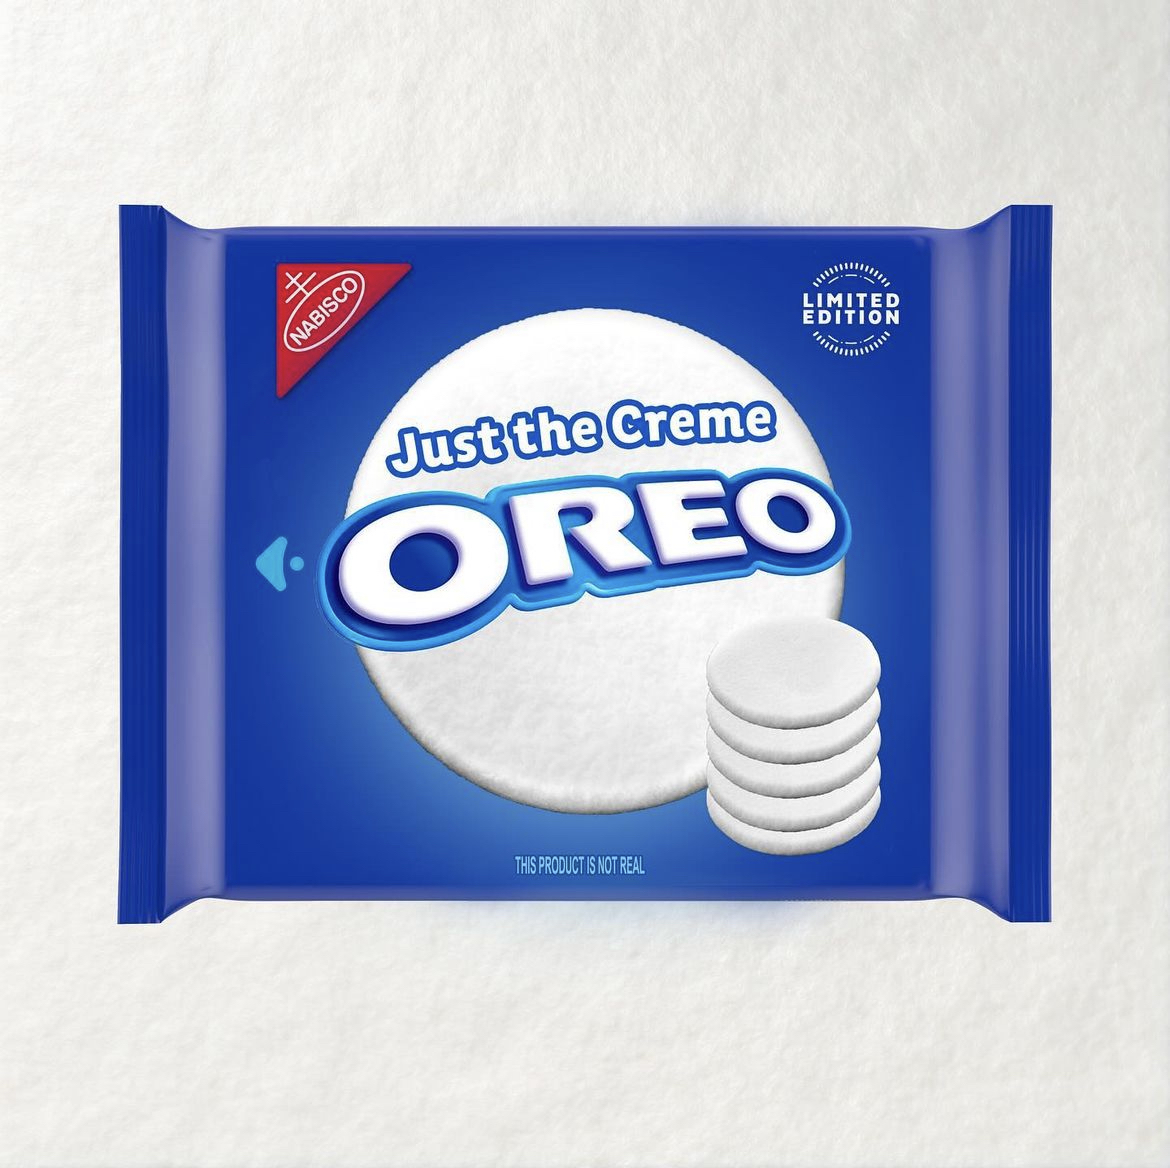 Milk%E2%80%99s+favorite+cookie+had+everyone+confused+with+their+new+invention+of+just+the+wafer+and+just+the+cr%C3%A8me.+Some+Oreo+fans+were+against+it+while+many+want+the+brand+to+actually+create+it.+Photo+credits+to+%40oreo+Instagram+